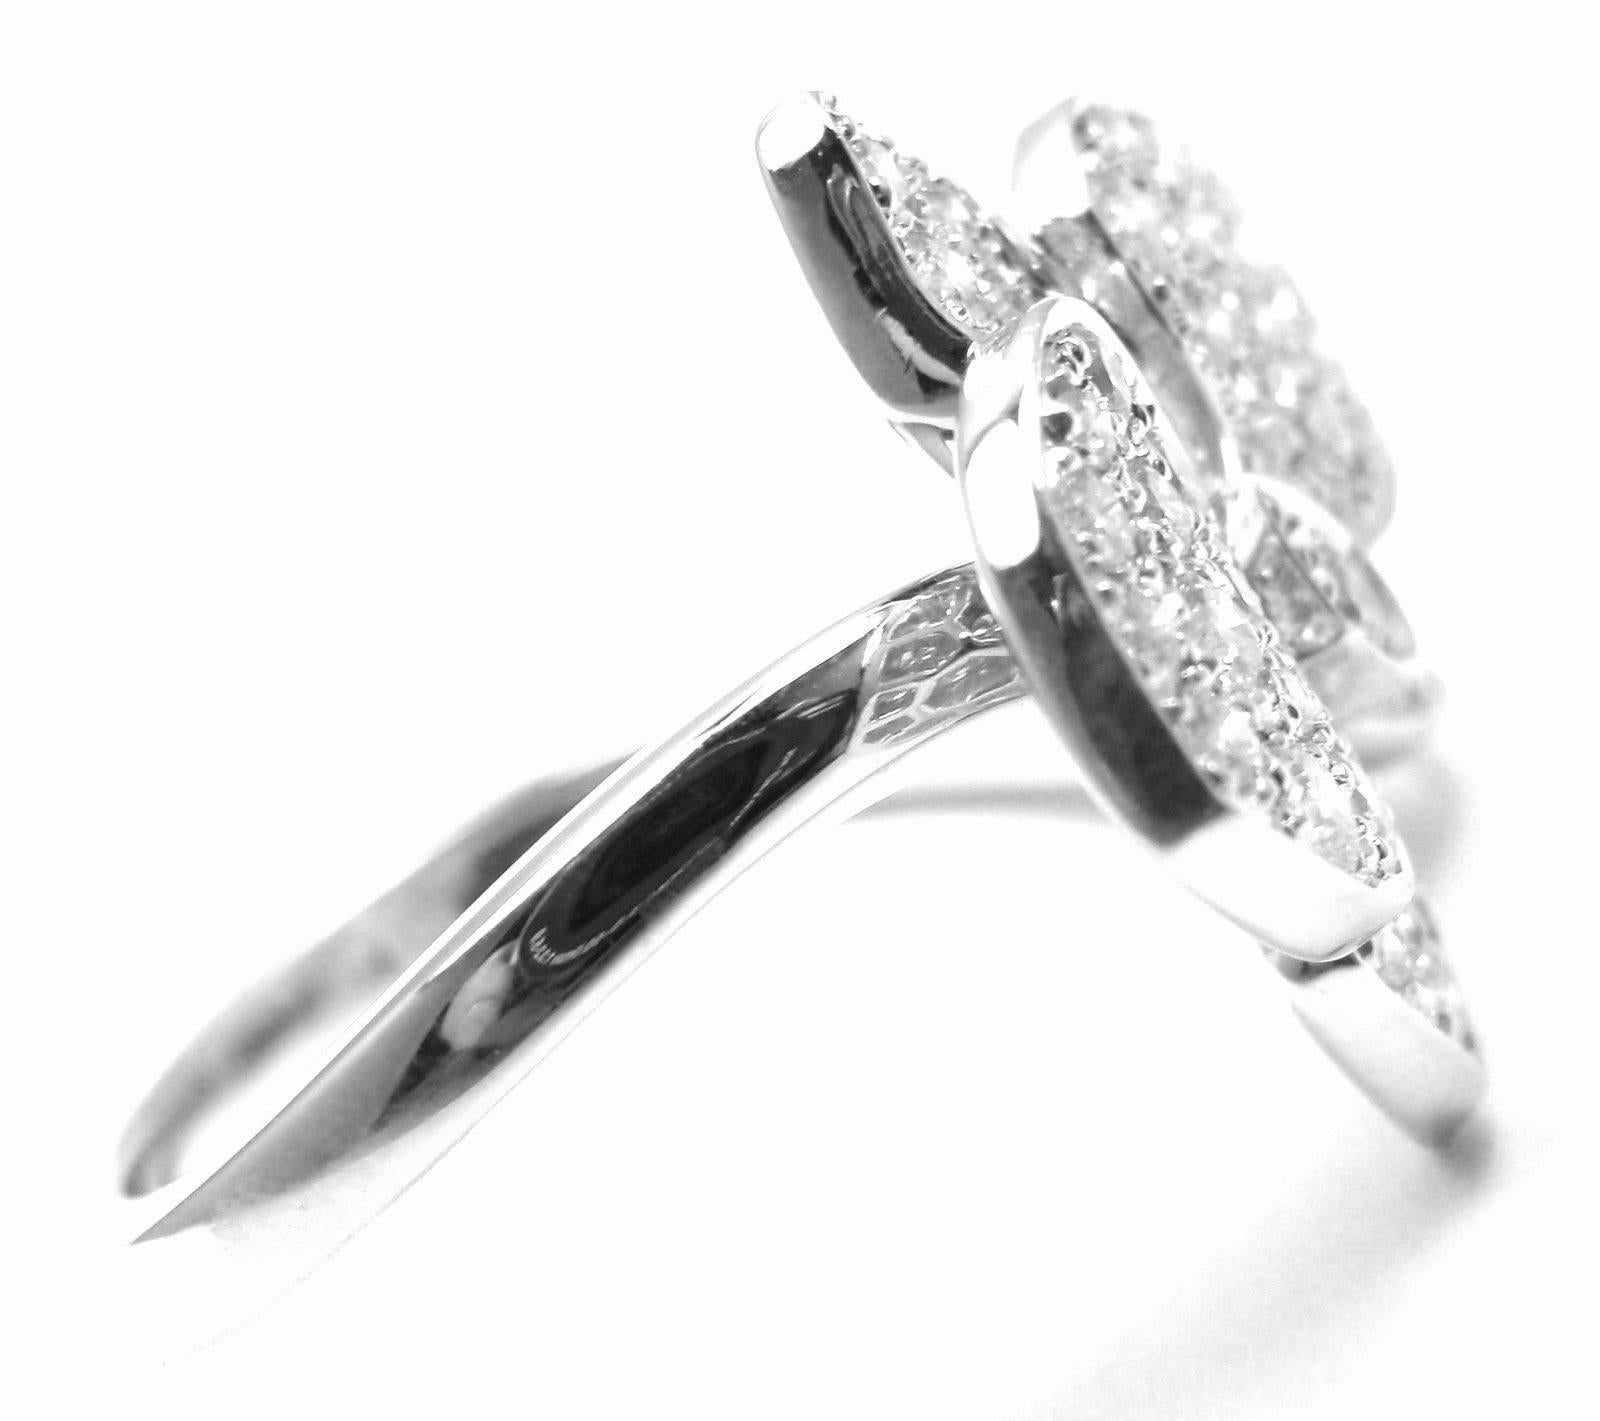 18k White Gold Caresse D'orchidées Orchid Flower Diamond Ring by Cartier.   
With 49 round brilliant cut diamonds VS1 clarity, E color total weight approx. .54ct
This ring comes with its original Cartier box.  
Details: 
Ring Size: European 52, US